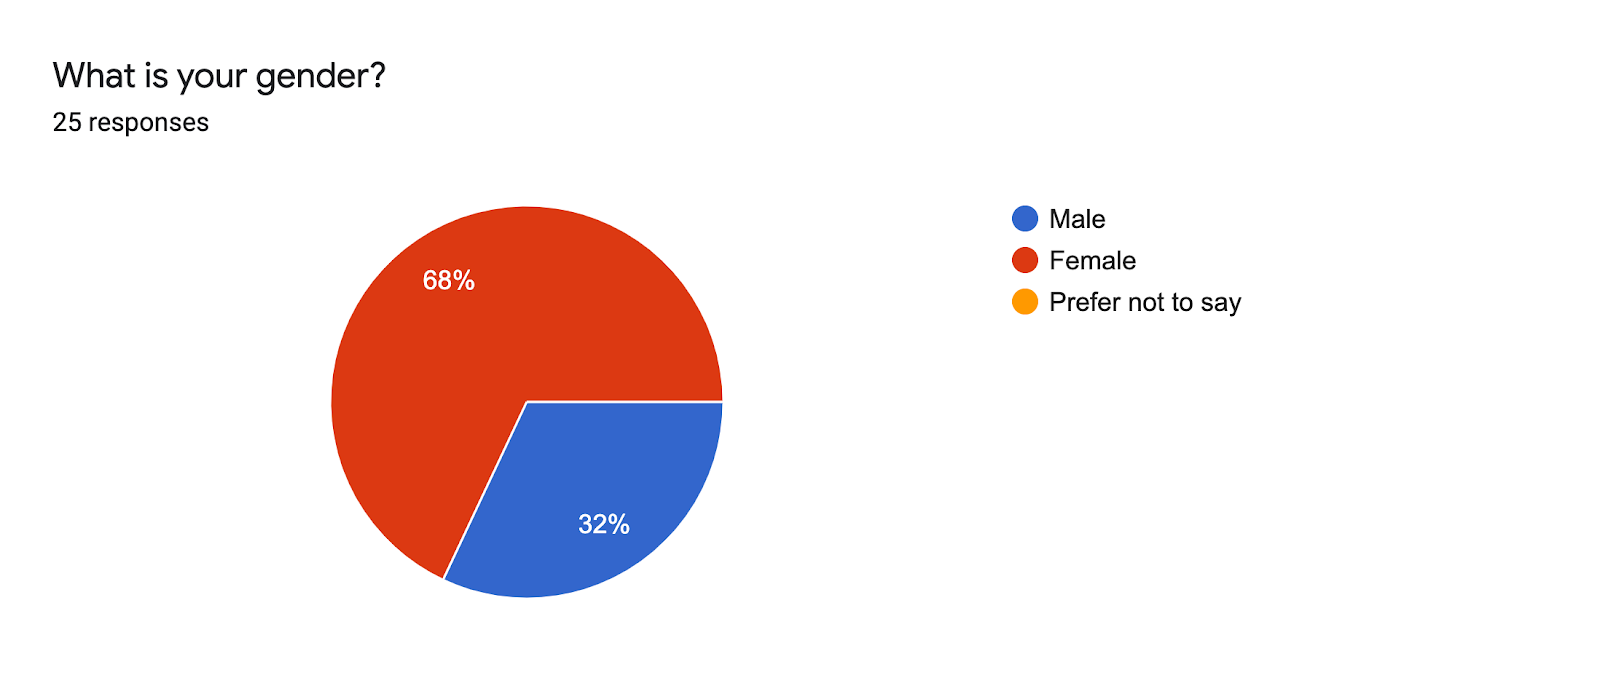 Forms response chart. Question title: What is your gender?. Number of responses: 25 responses.